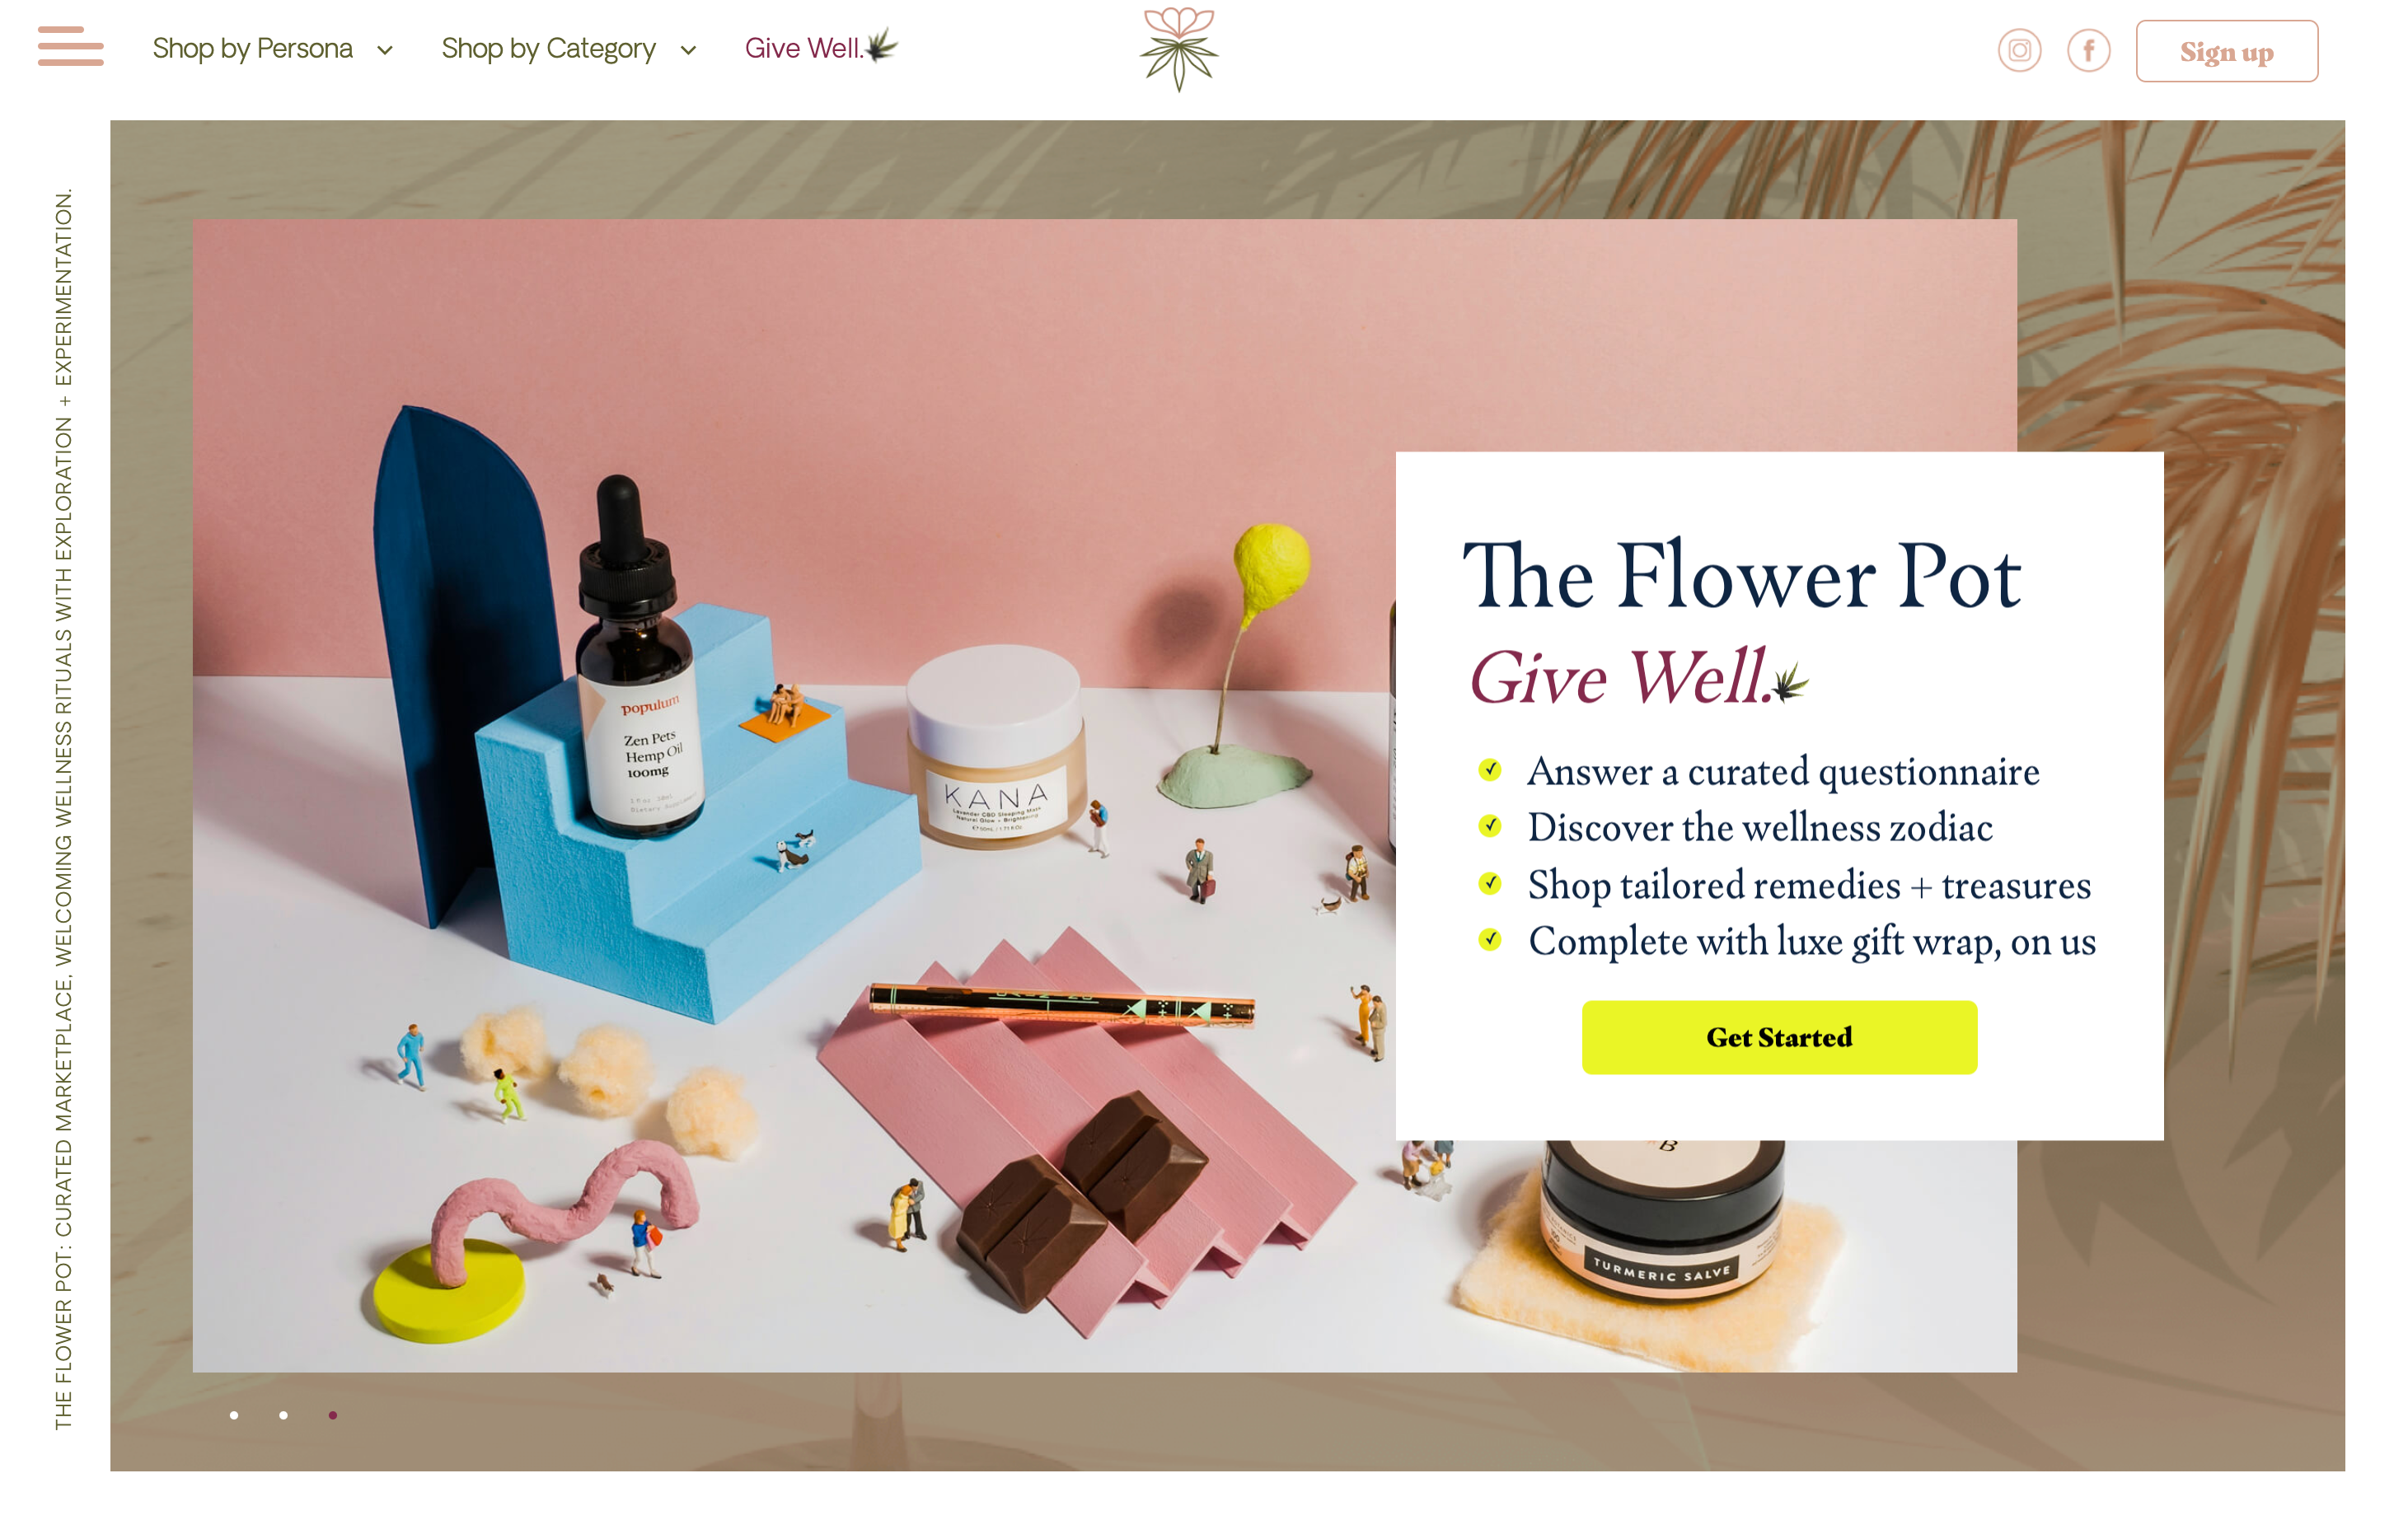 Give Well, The Flower Pot's interactive gift experience